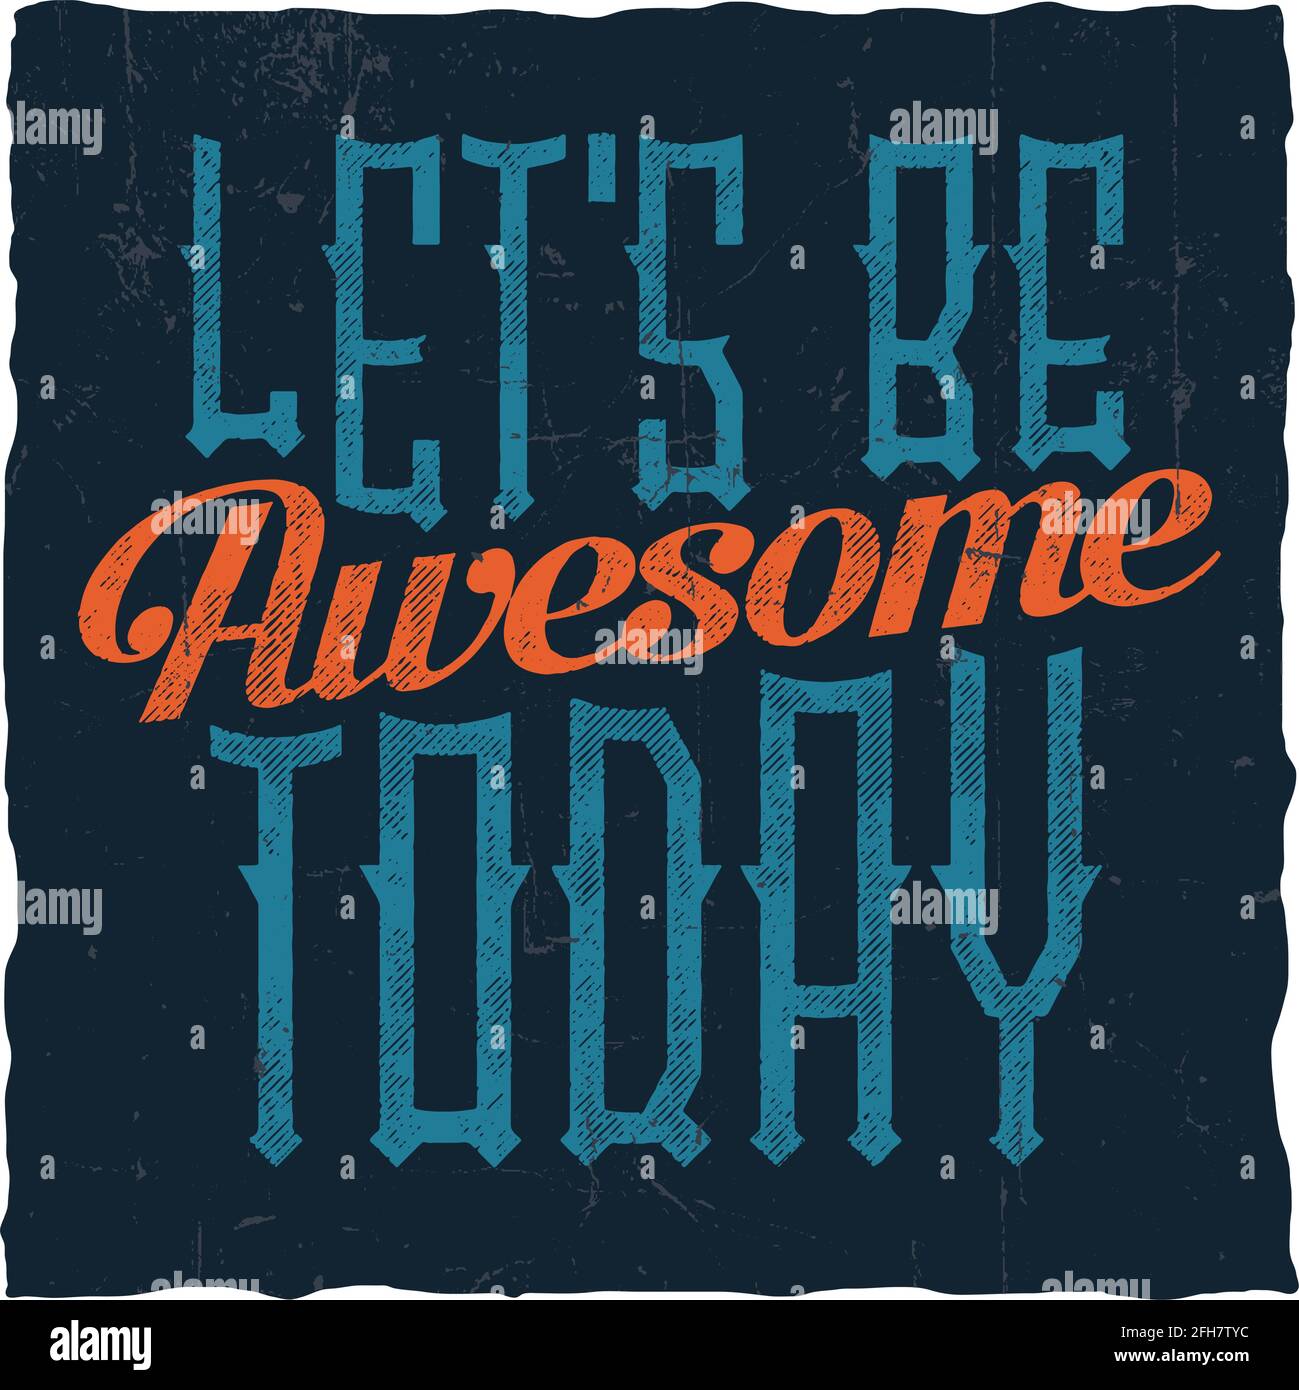 Motivational poster. "Let's be awesome today". Inspirational quote design. Stock Vector